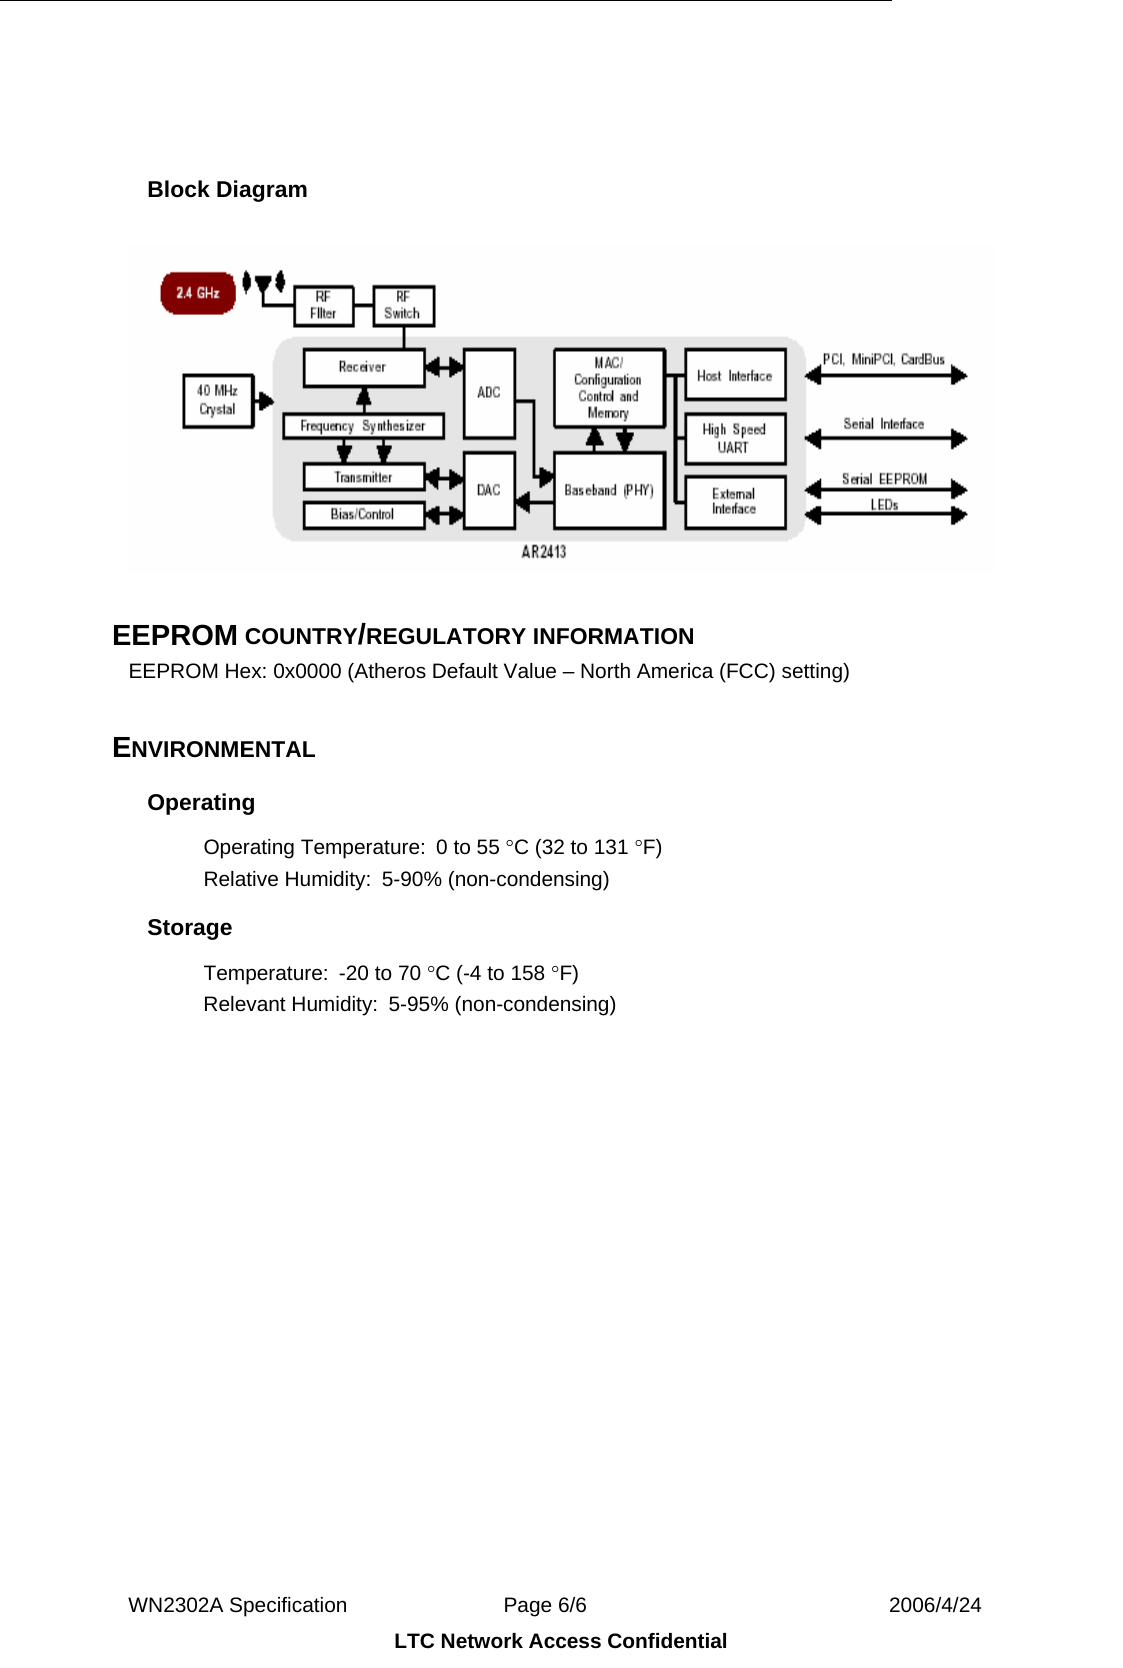  WN2302A Specification               Page 6/6                             2006/4/24 LTC Network Access Confidential   Block Diagram     EEPROM COUNTRY/REGULATORY INFORMATION EEPROM Hex: 0x0000 (Atheros Default Value – North America (FCC) setting)  ENVIRONMENTAL Operating Operating Temperature:  0 to 55 °C (32 to 131 °F) Relative Humidity:  5-90% (non-condensing) Storage Temperature:  -20 to 70 °C (-4 to 158 °F) Relevant Humidity:  5-95% (non-condensing)  